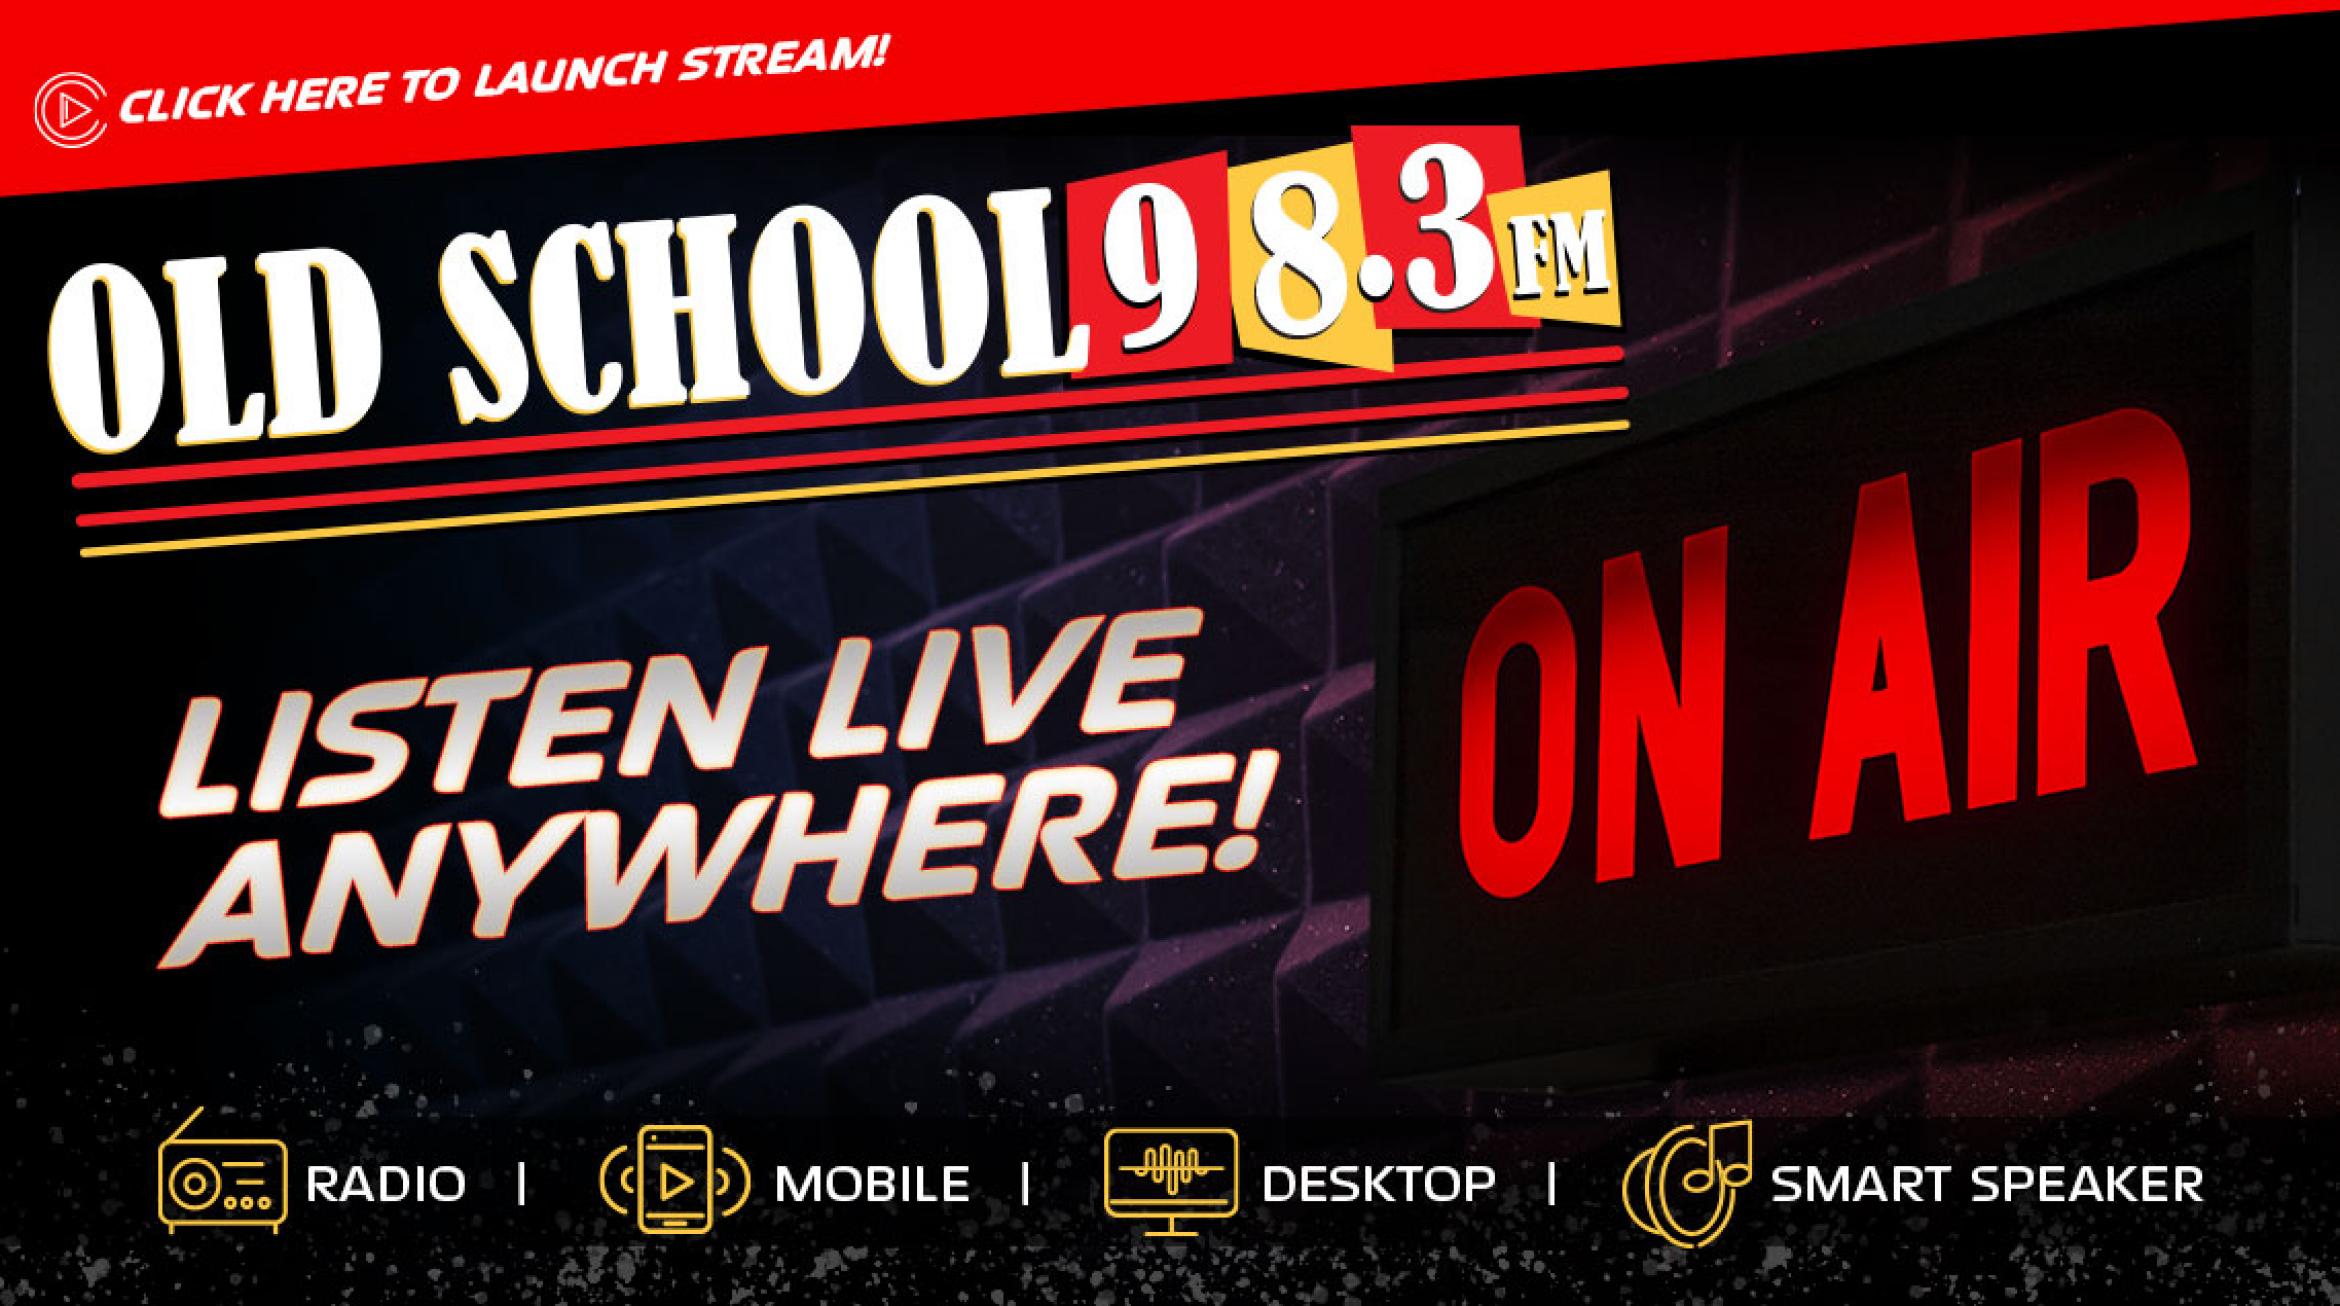 1140x635 ListenLive Anywhere Oldschool 983